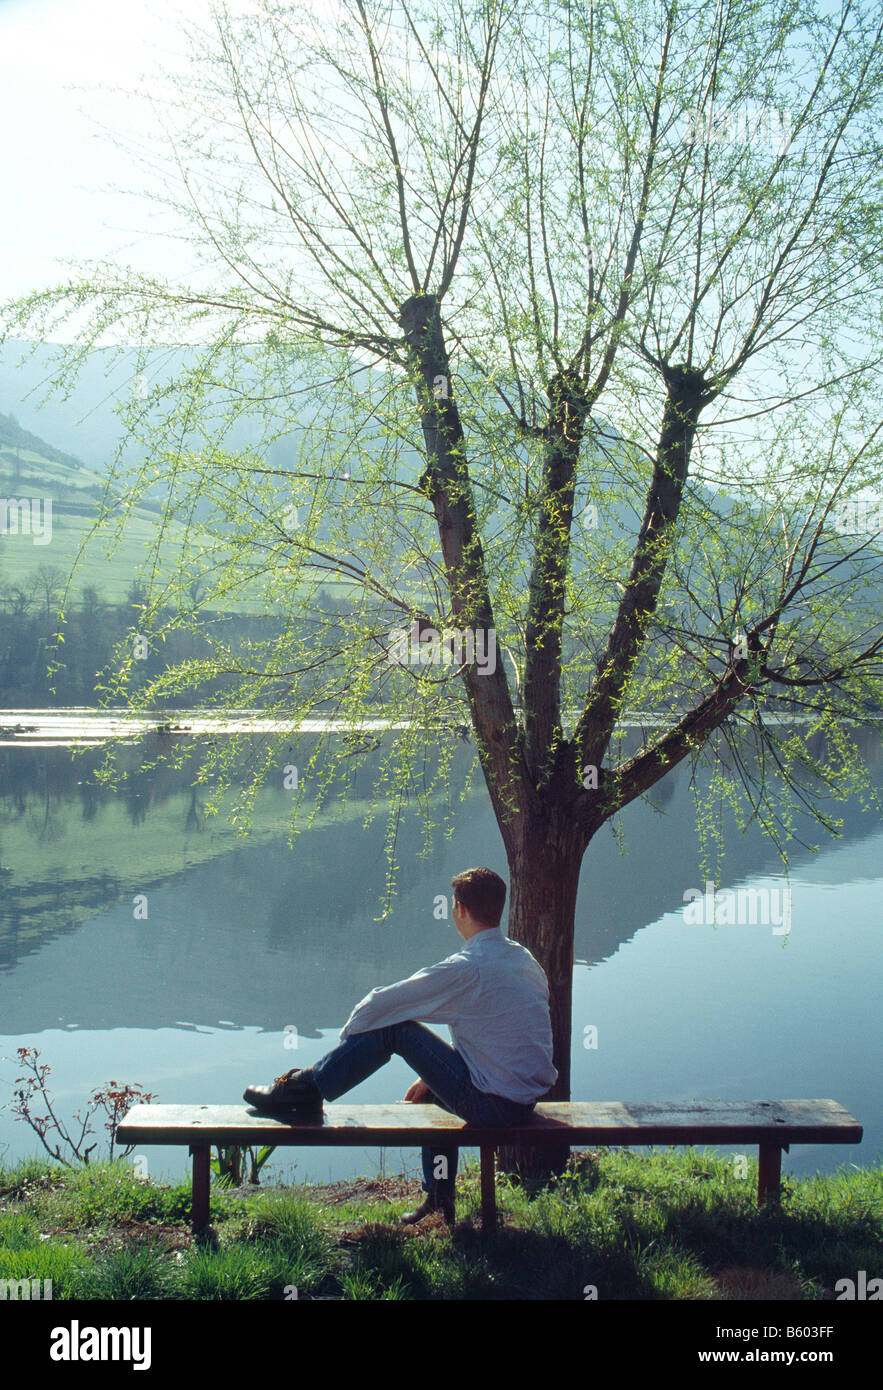 Man sitting and looking at the lake. Florida reservoir. Tineo. Asturias province. Spain. Stock Photo